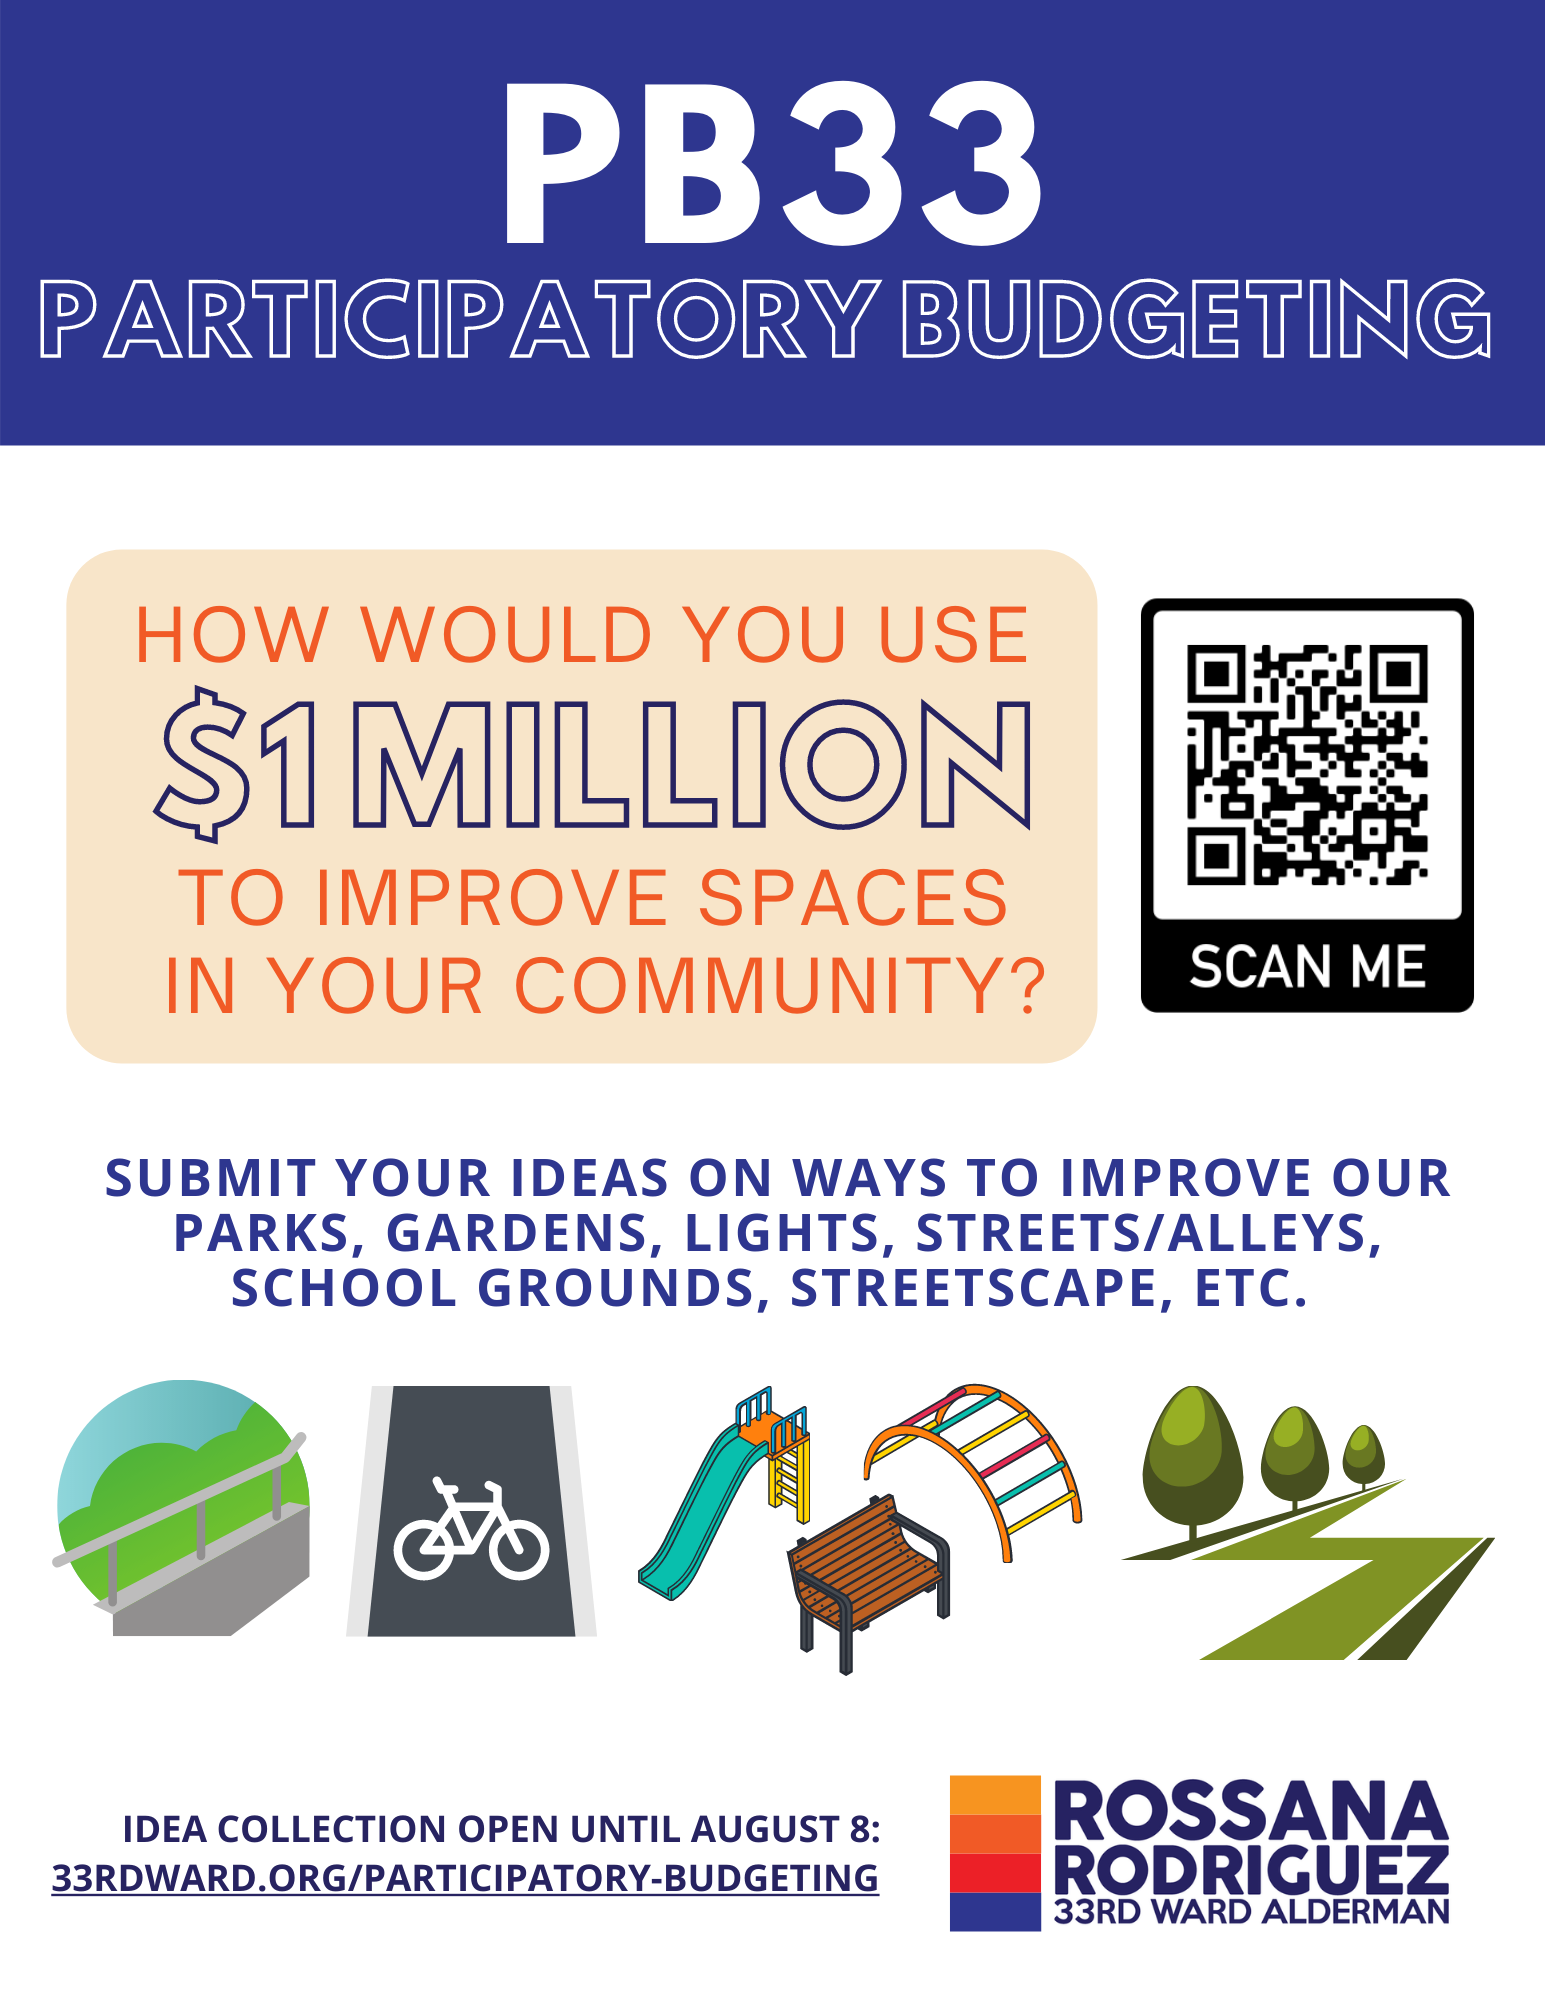 Submit your ideas for PB33 2022